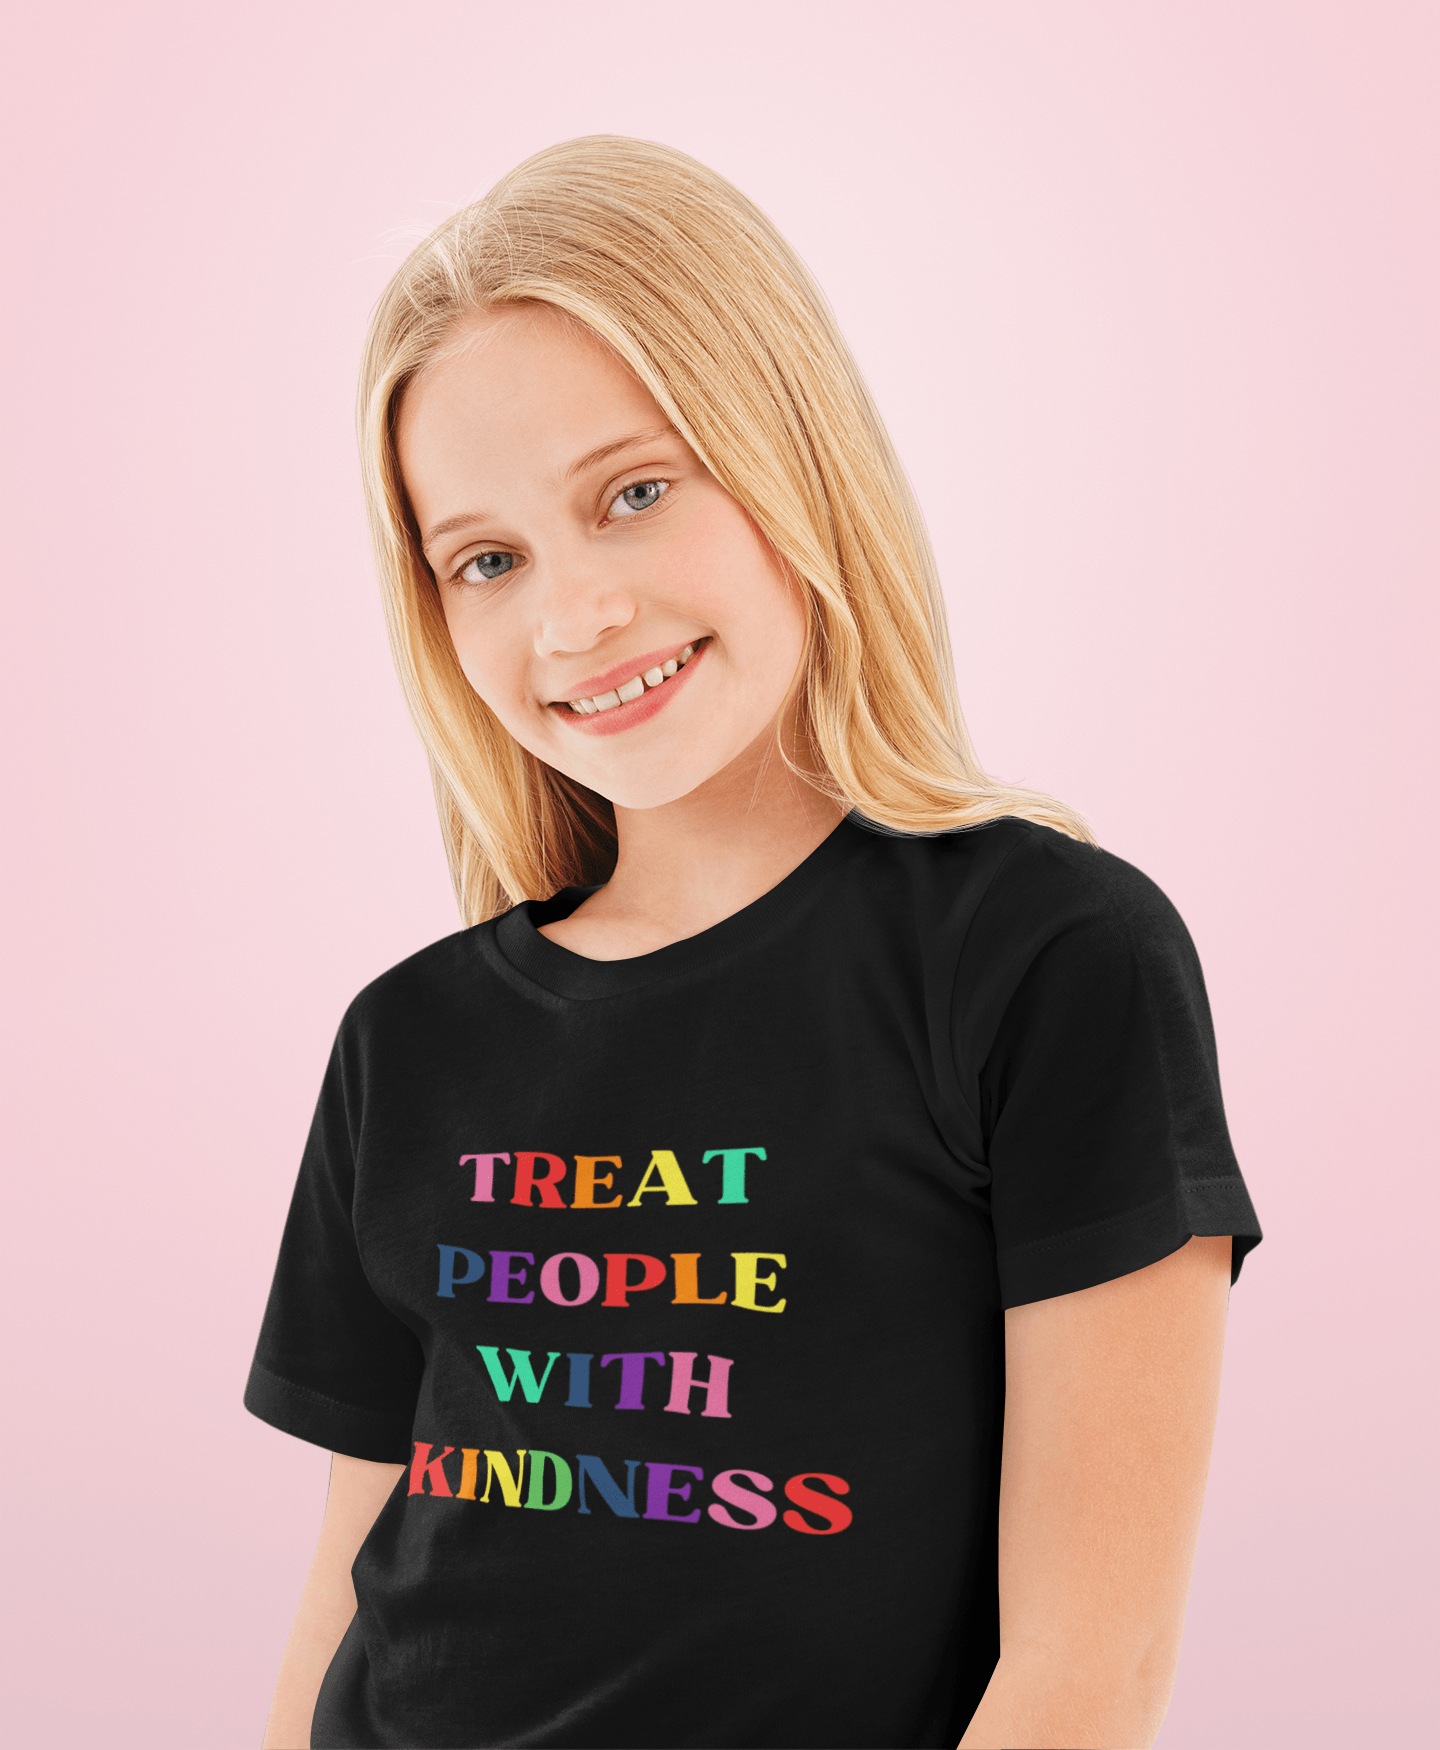 Treat People with Kindness Printed Youth Short Sleeve T-Shirt - The Kindness Cause